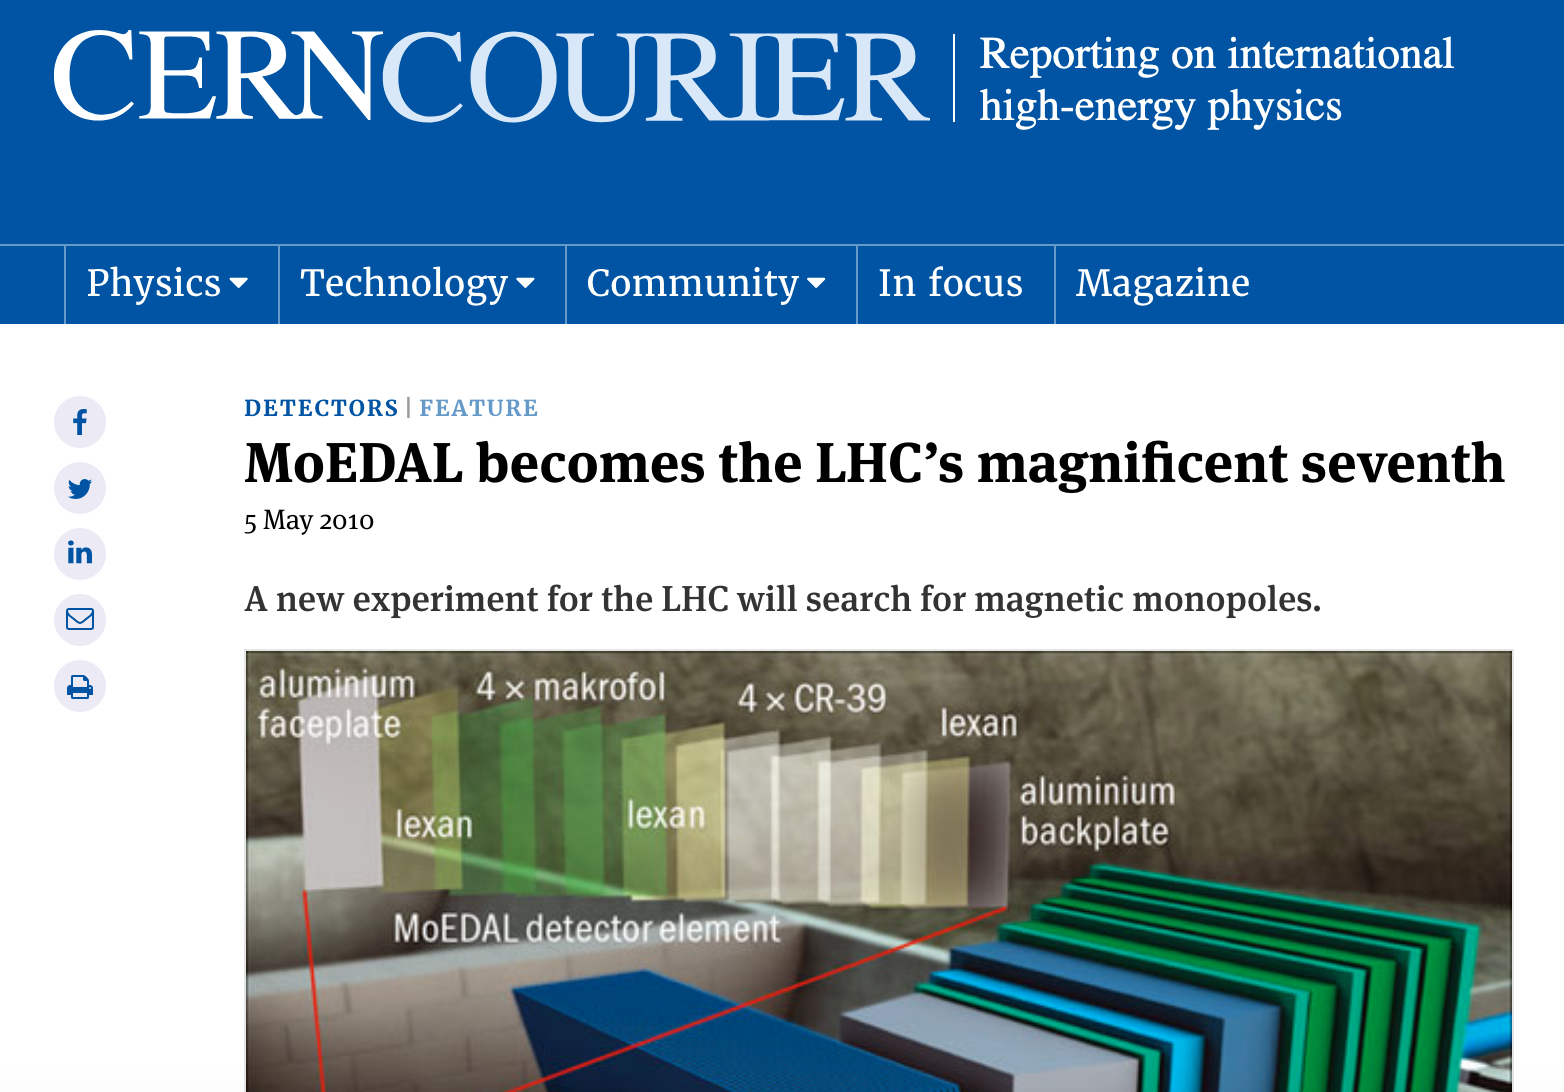 MoEDAL becomes the LHC's 7th experimet